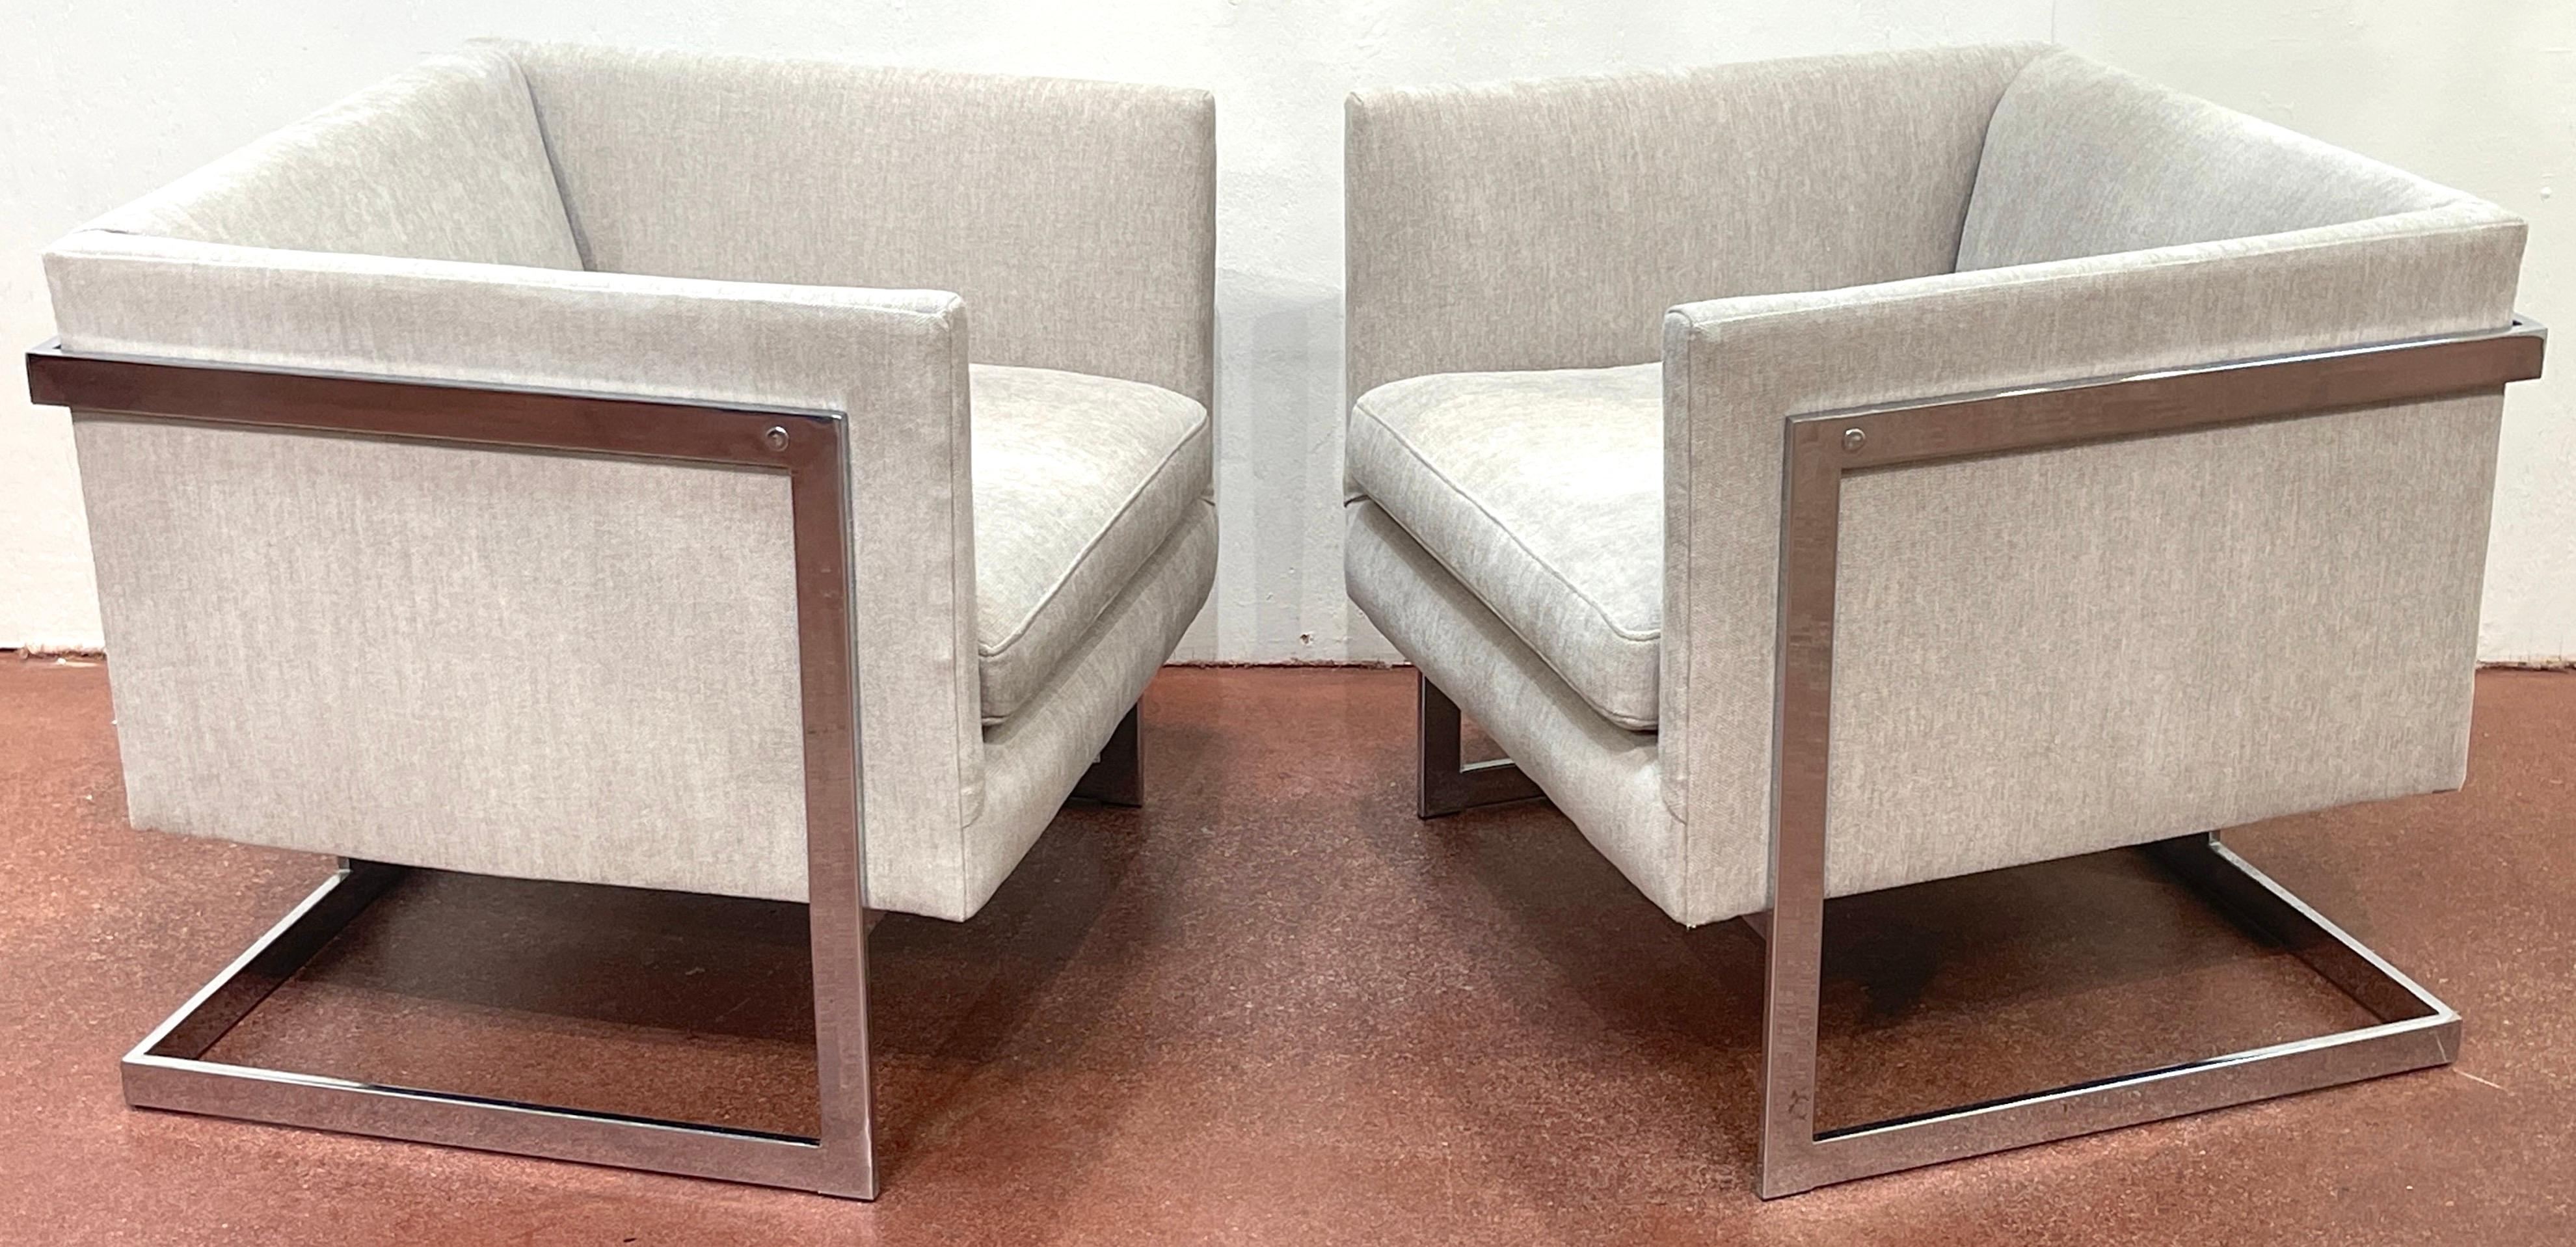 Pair of Milo Baughman Floating Cube Club Chairs
USA, Circa 1980s

A sleek and stunning pair of Milo Baughman Floating Cube Club Chairs, These chairs are a fine examples  to Baughman's iconic design style and represent a blend of form and